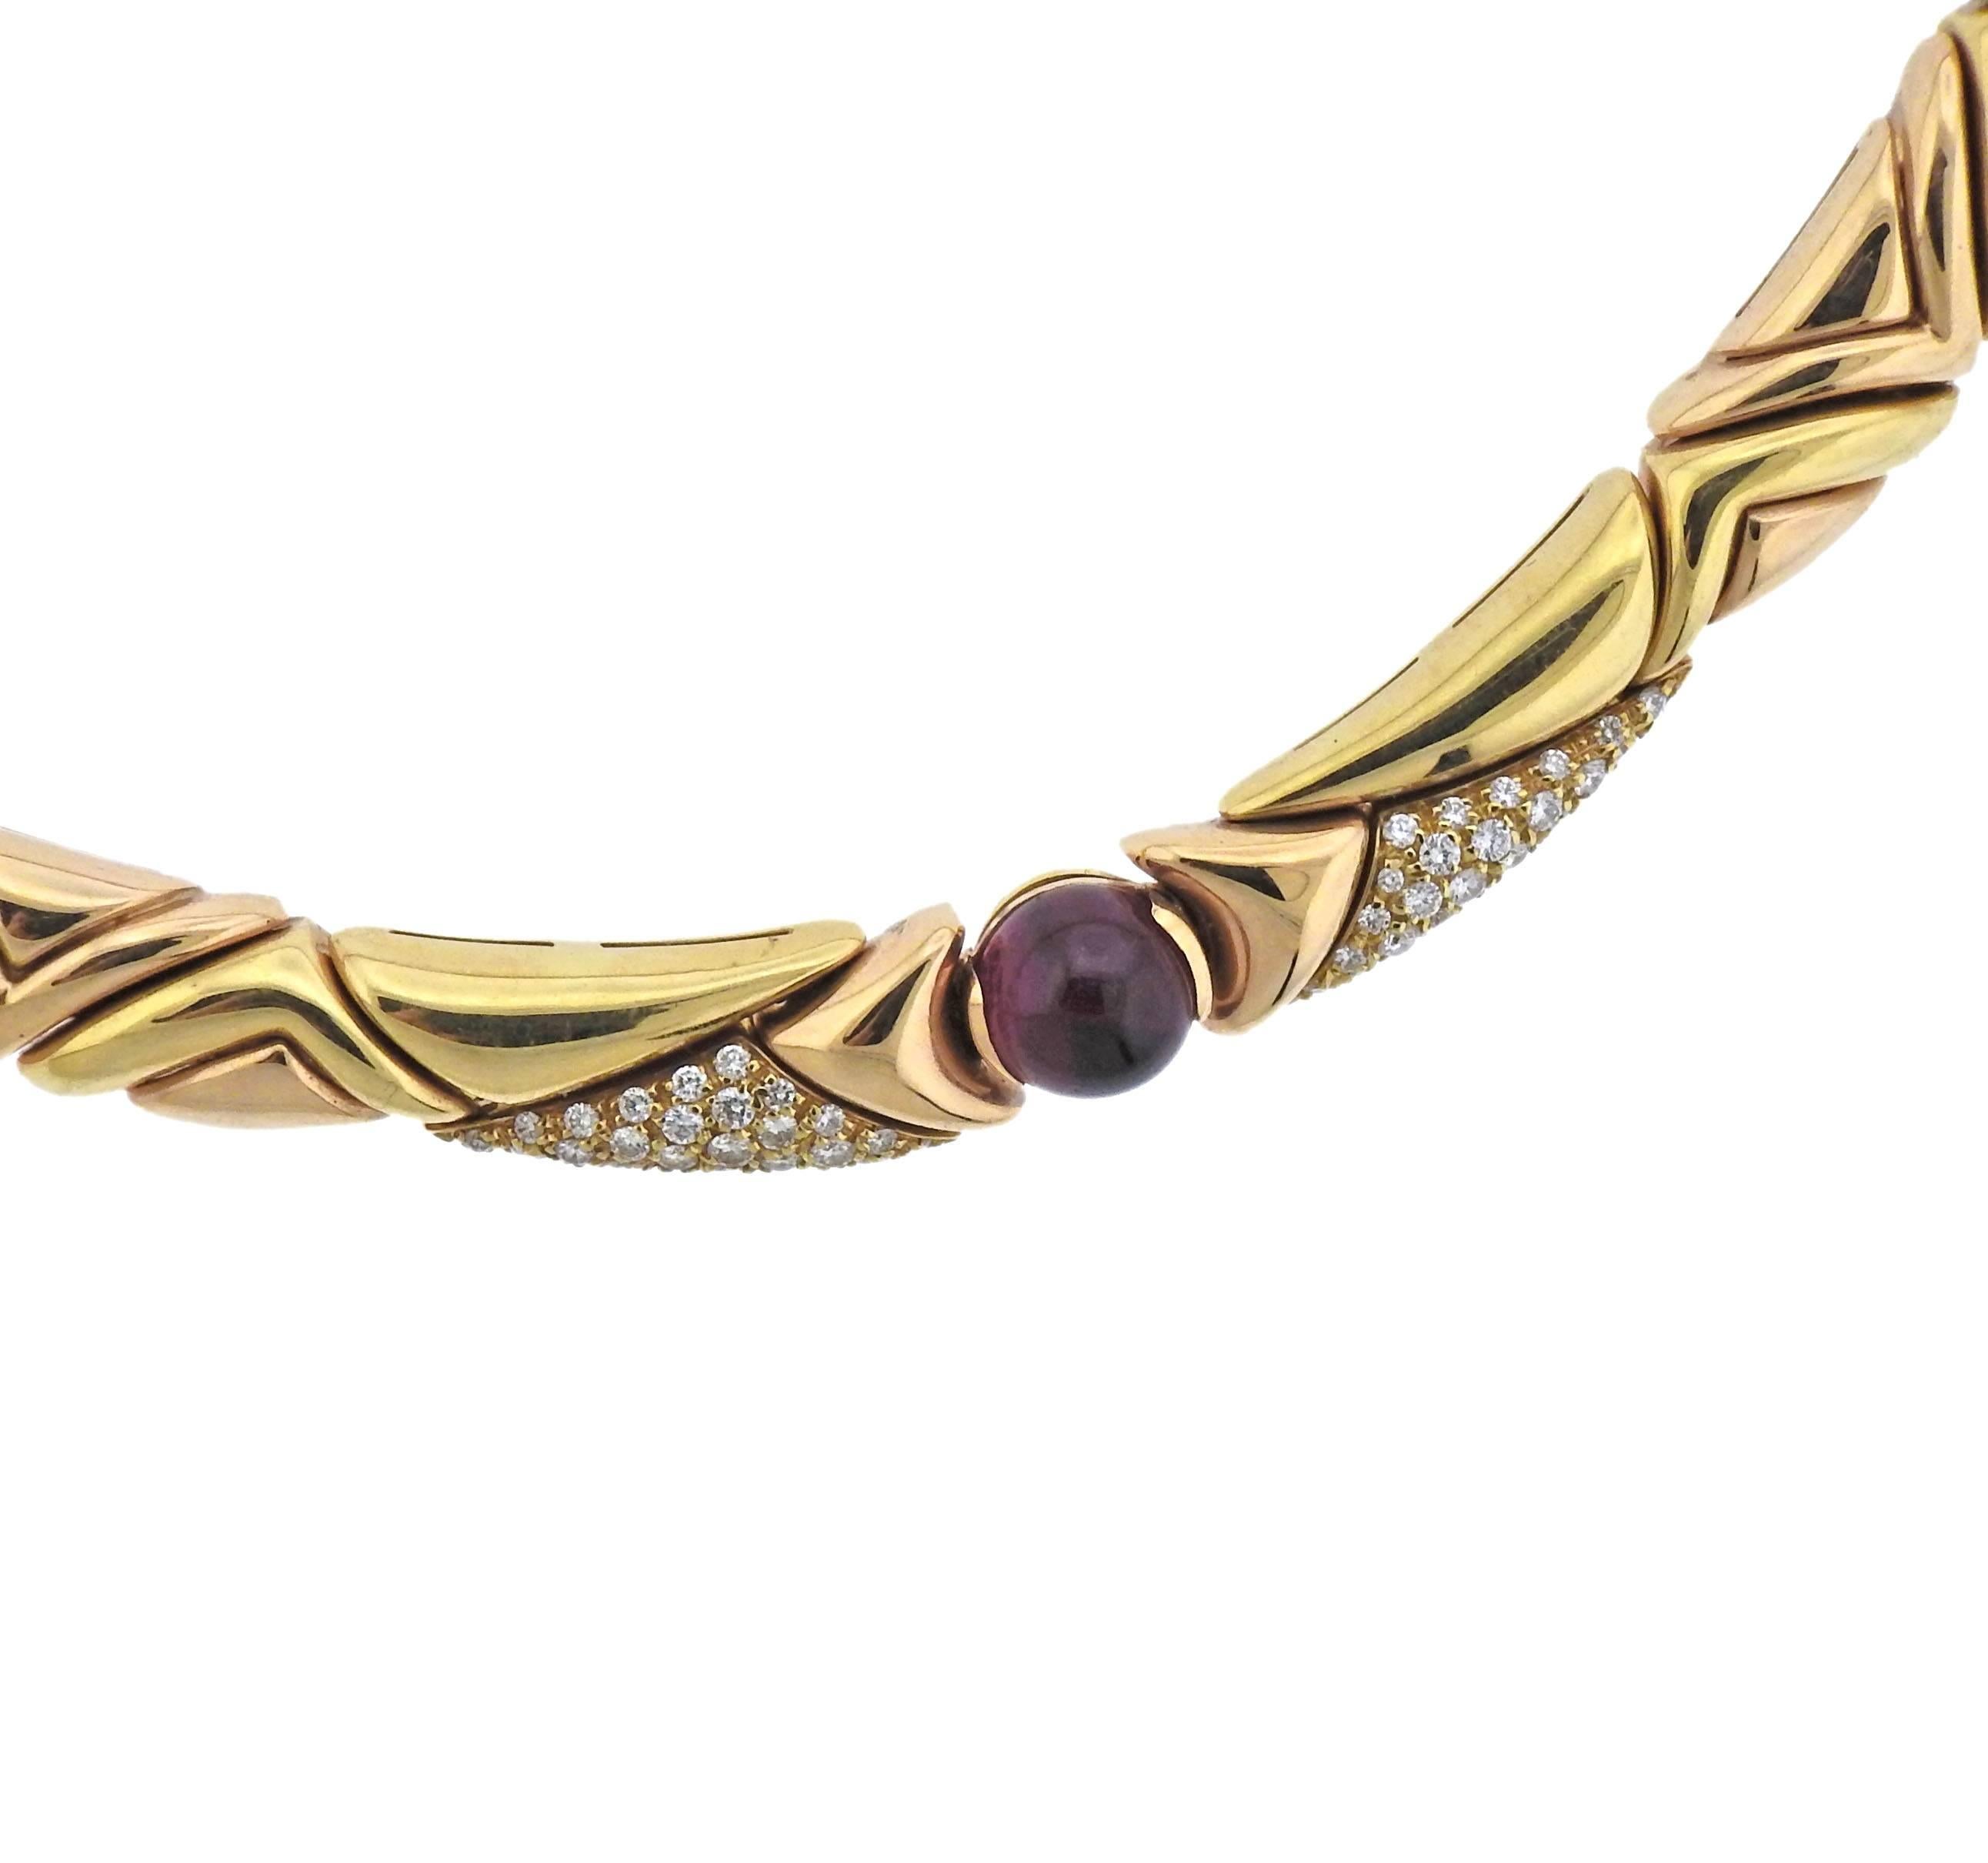  18k yellow gold necklace, crafted by Bulgari, decorated with 8mm tourmaline, citrine and amethyst balls, and approx. 2.50ctw in G/VS diamonds . Necklace is 15